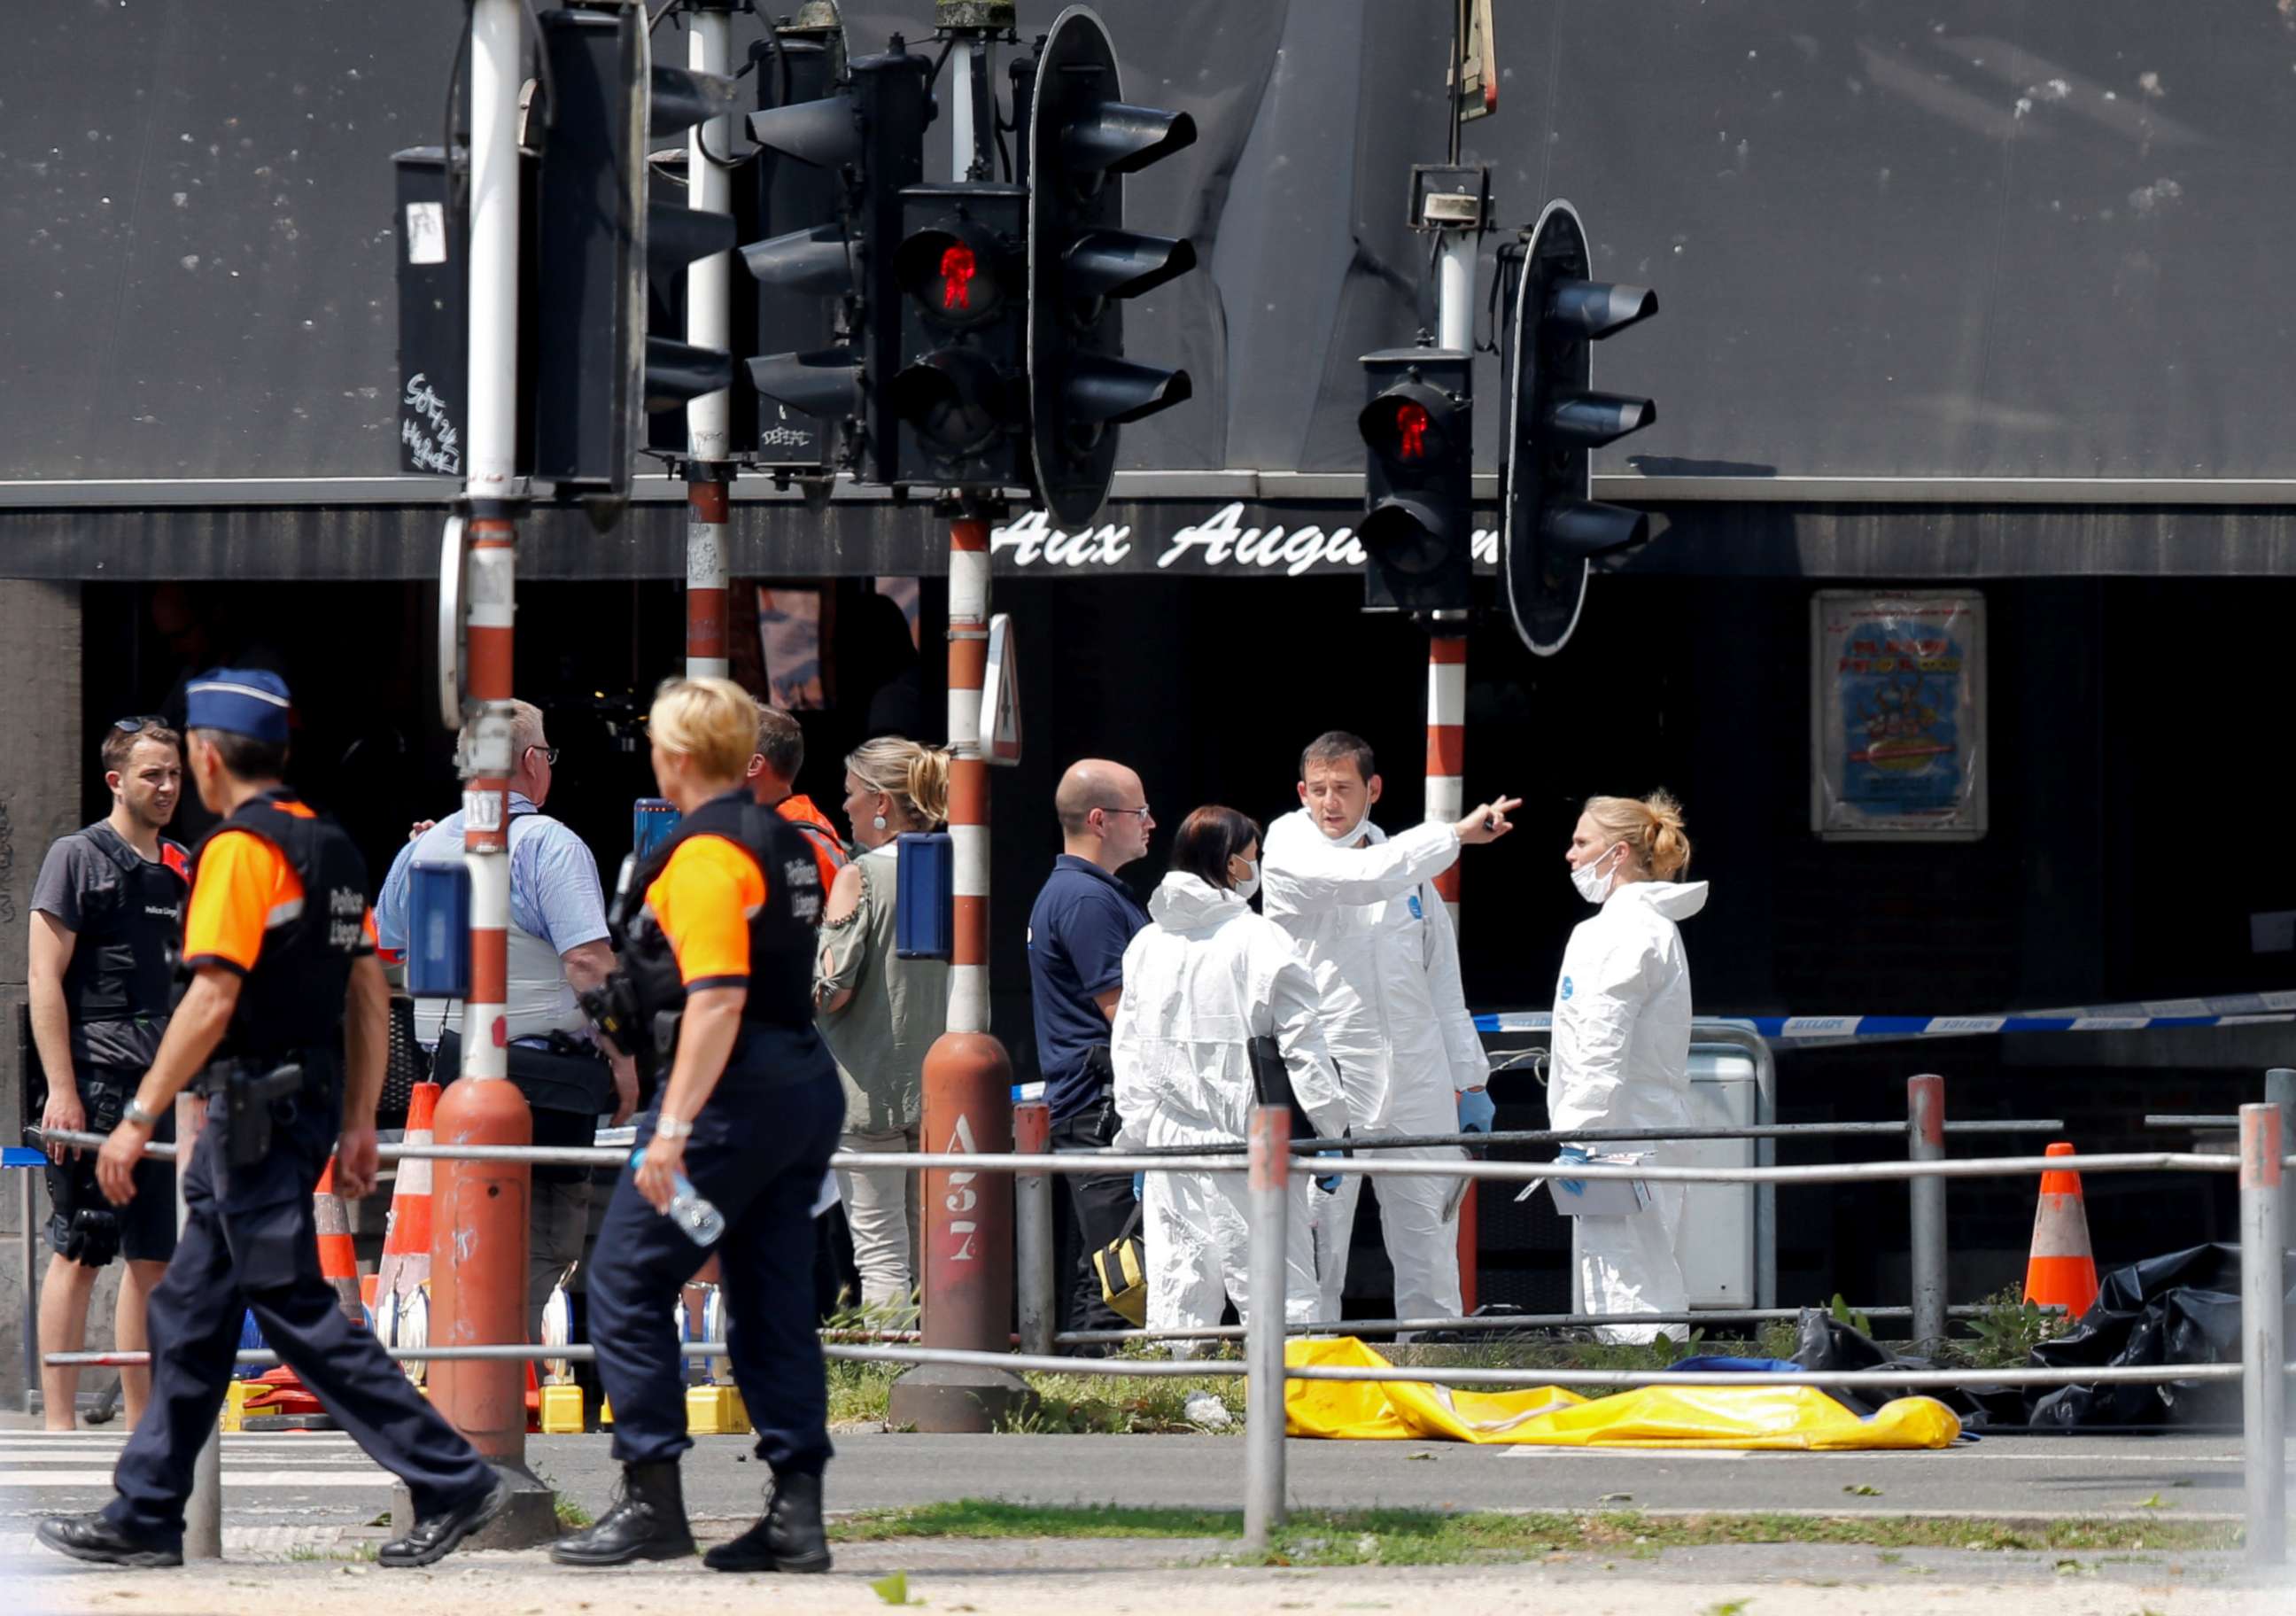 PHOTO: Forensics experts are seen on the scene of a shooting in Liege, Belgium, May 29, 2018.